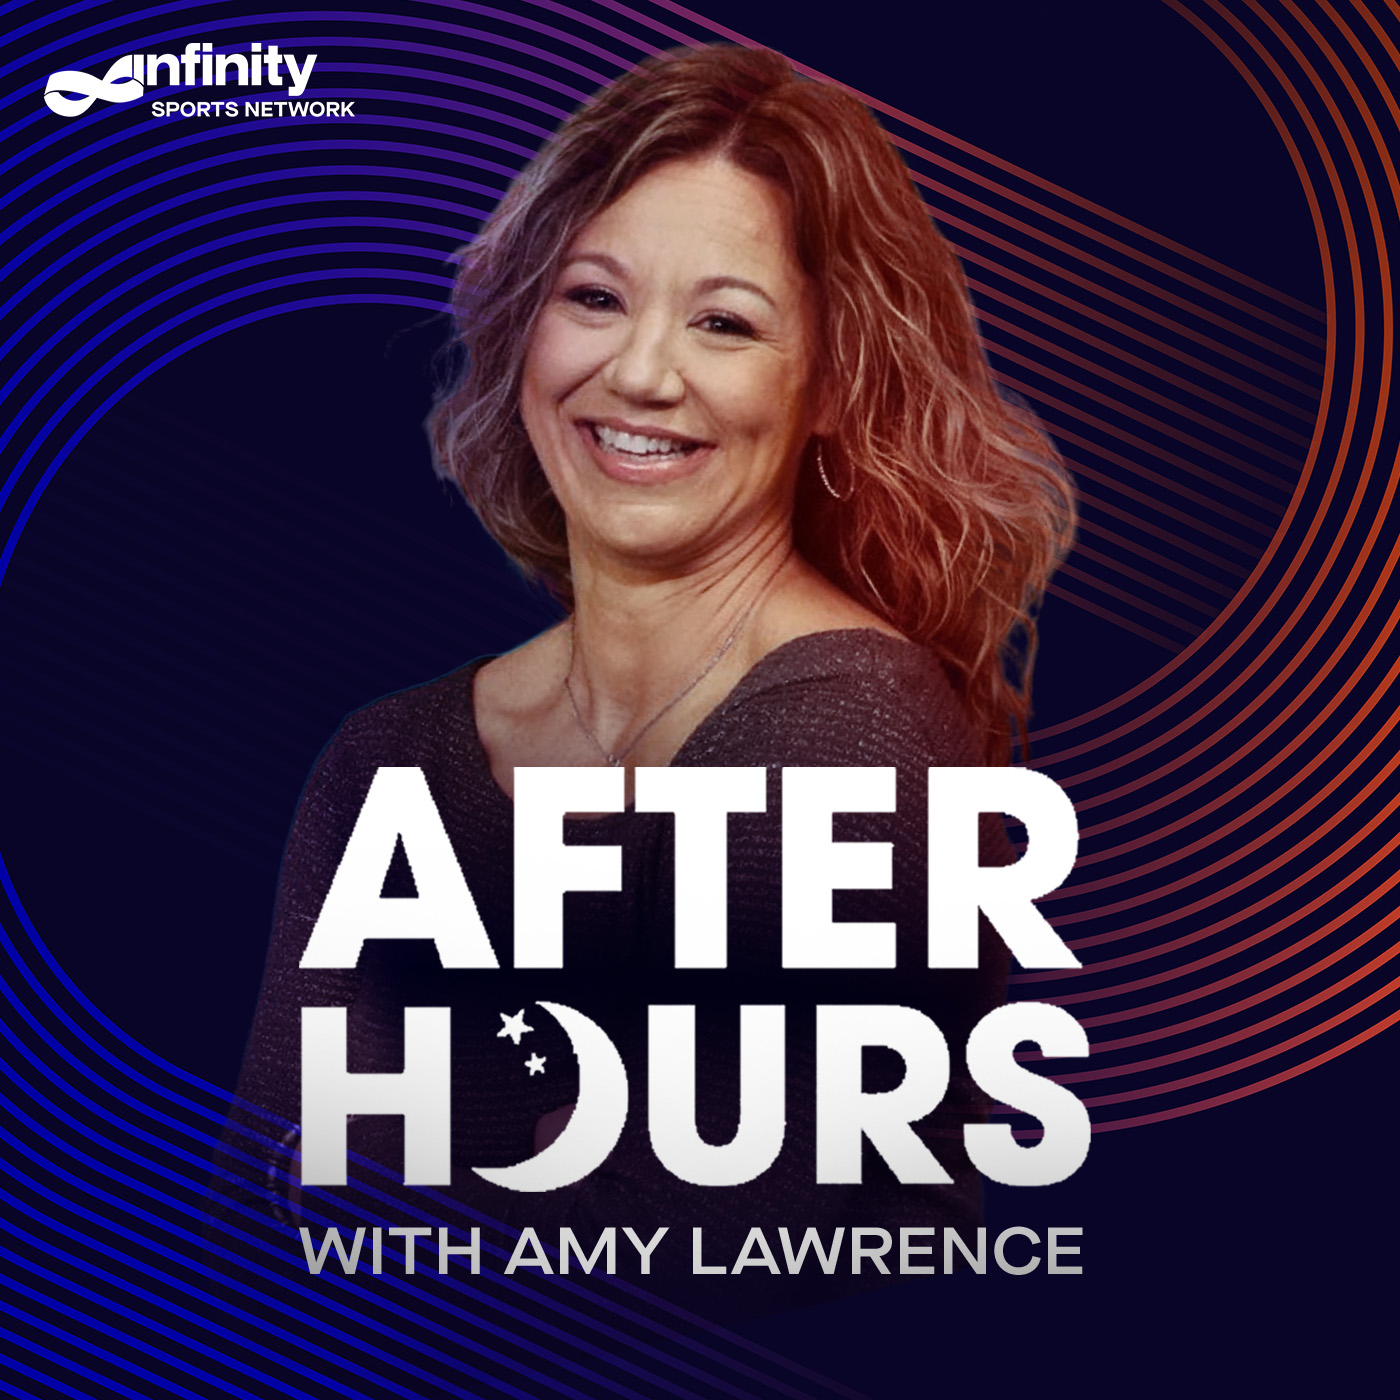 5/19/21 After Hours with Amy Lawrence PODCAST: Hour 2